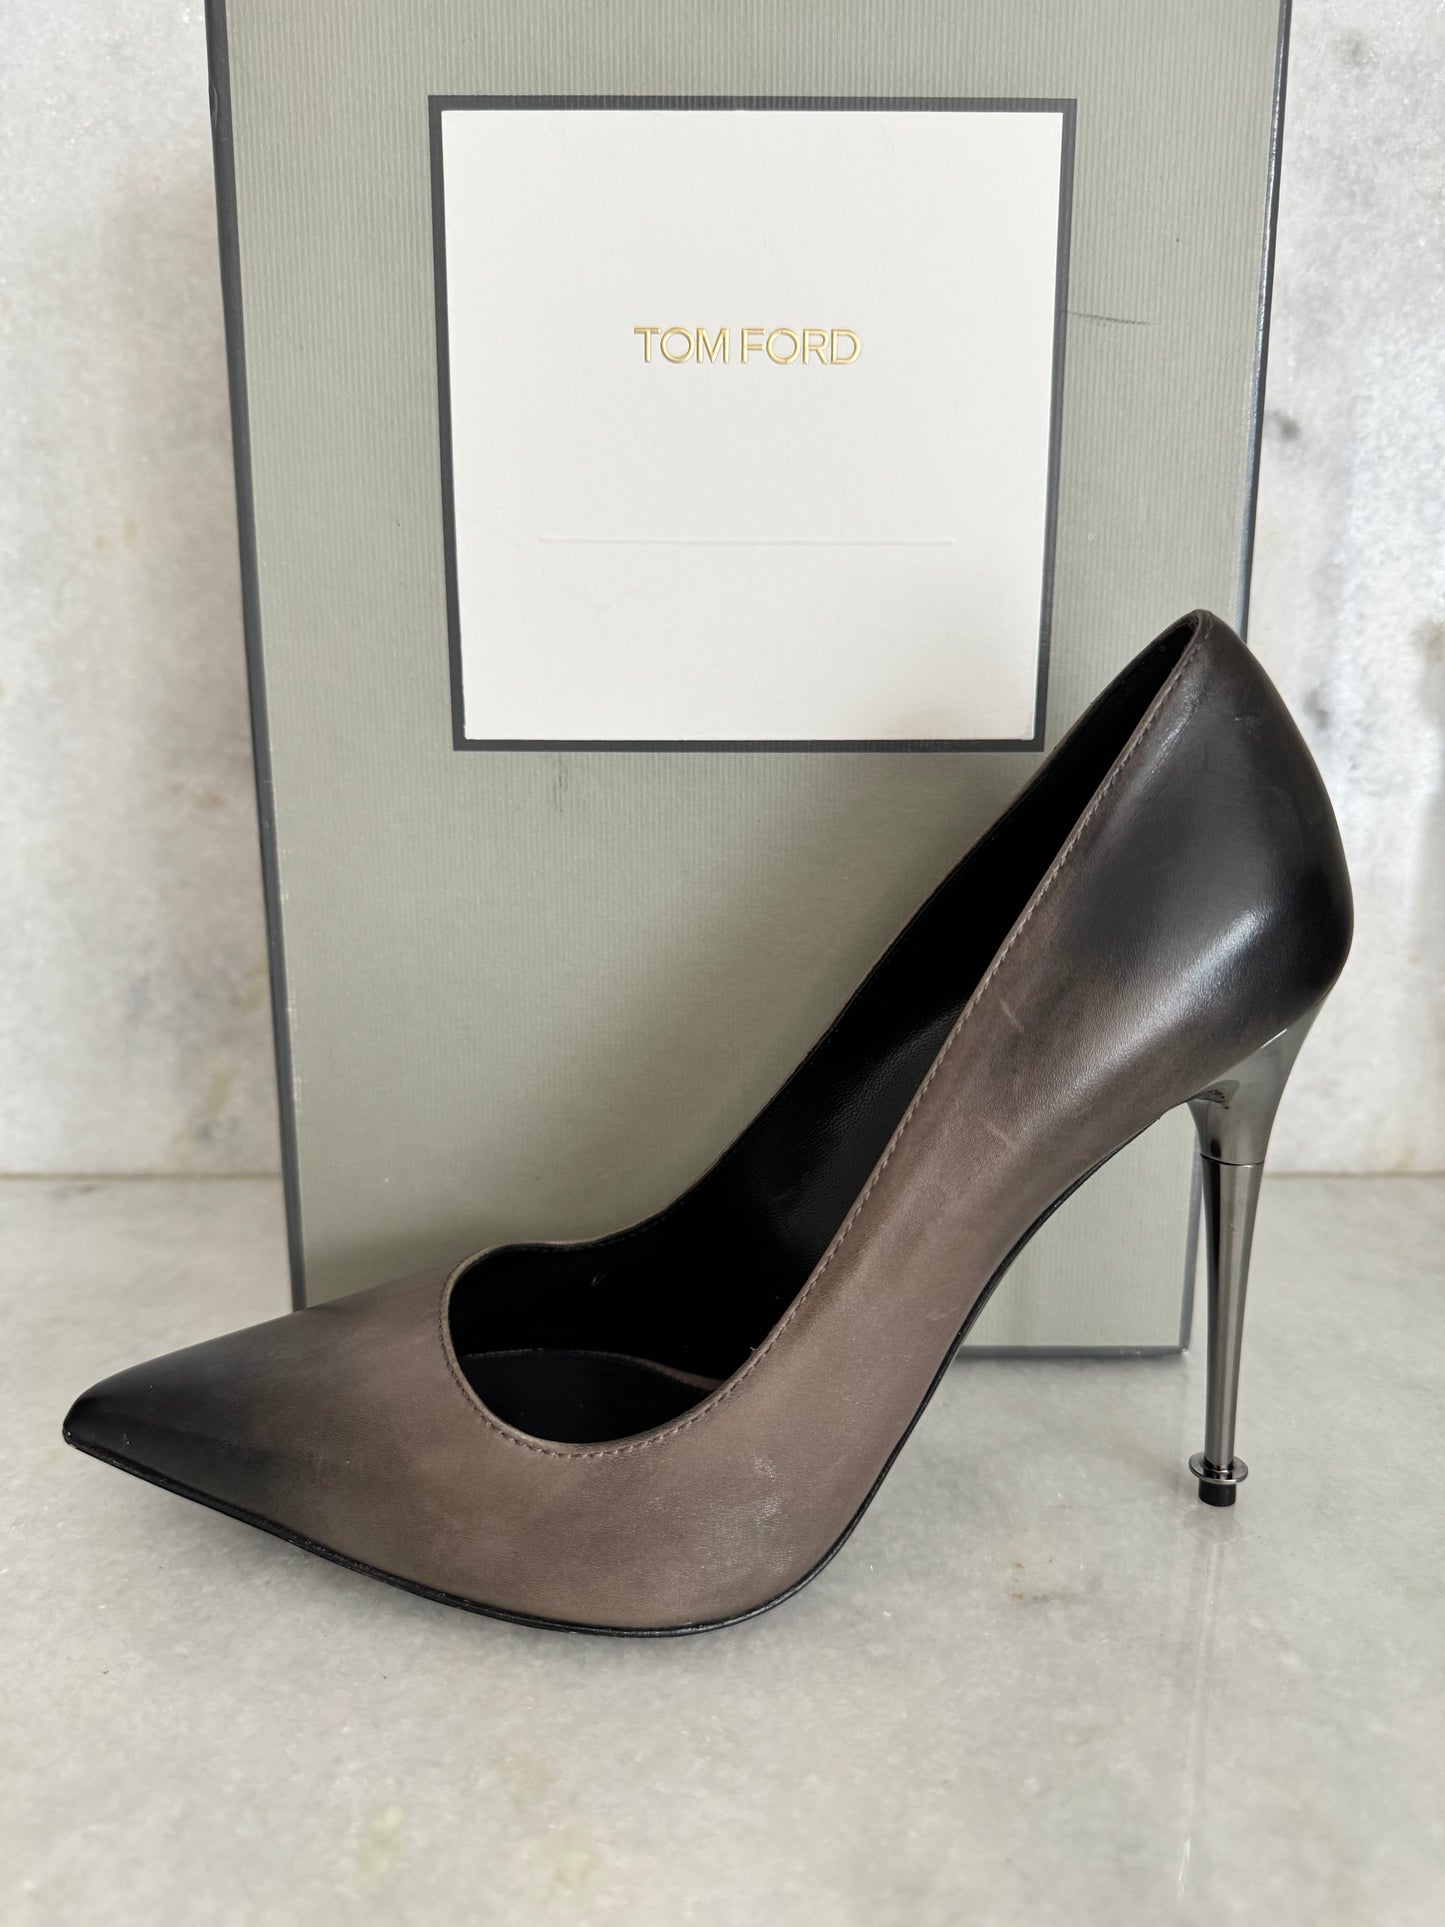 Tom Ford Iconic Gray Black Ombre Tinted Leather Metal Heel Pumps